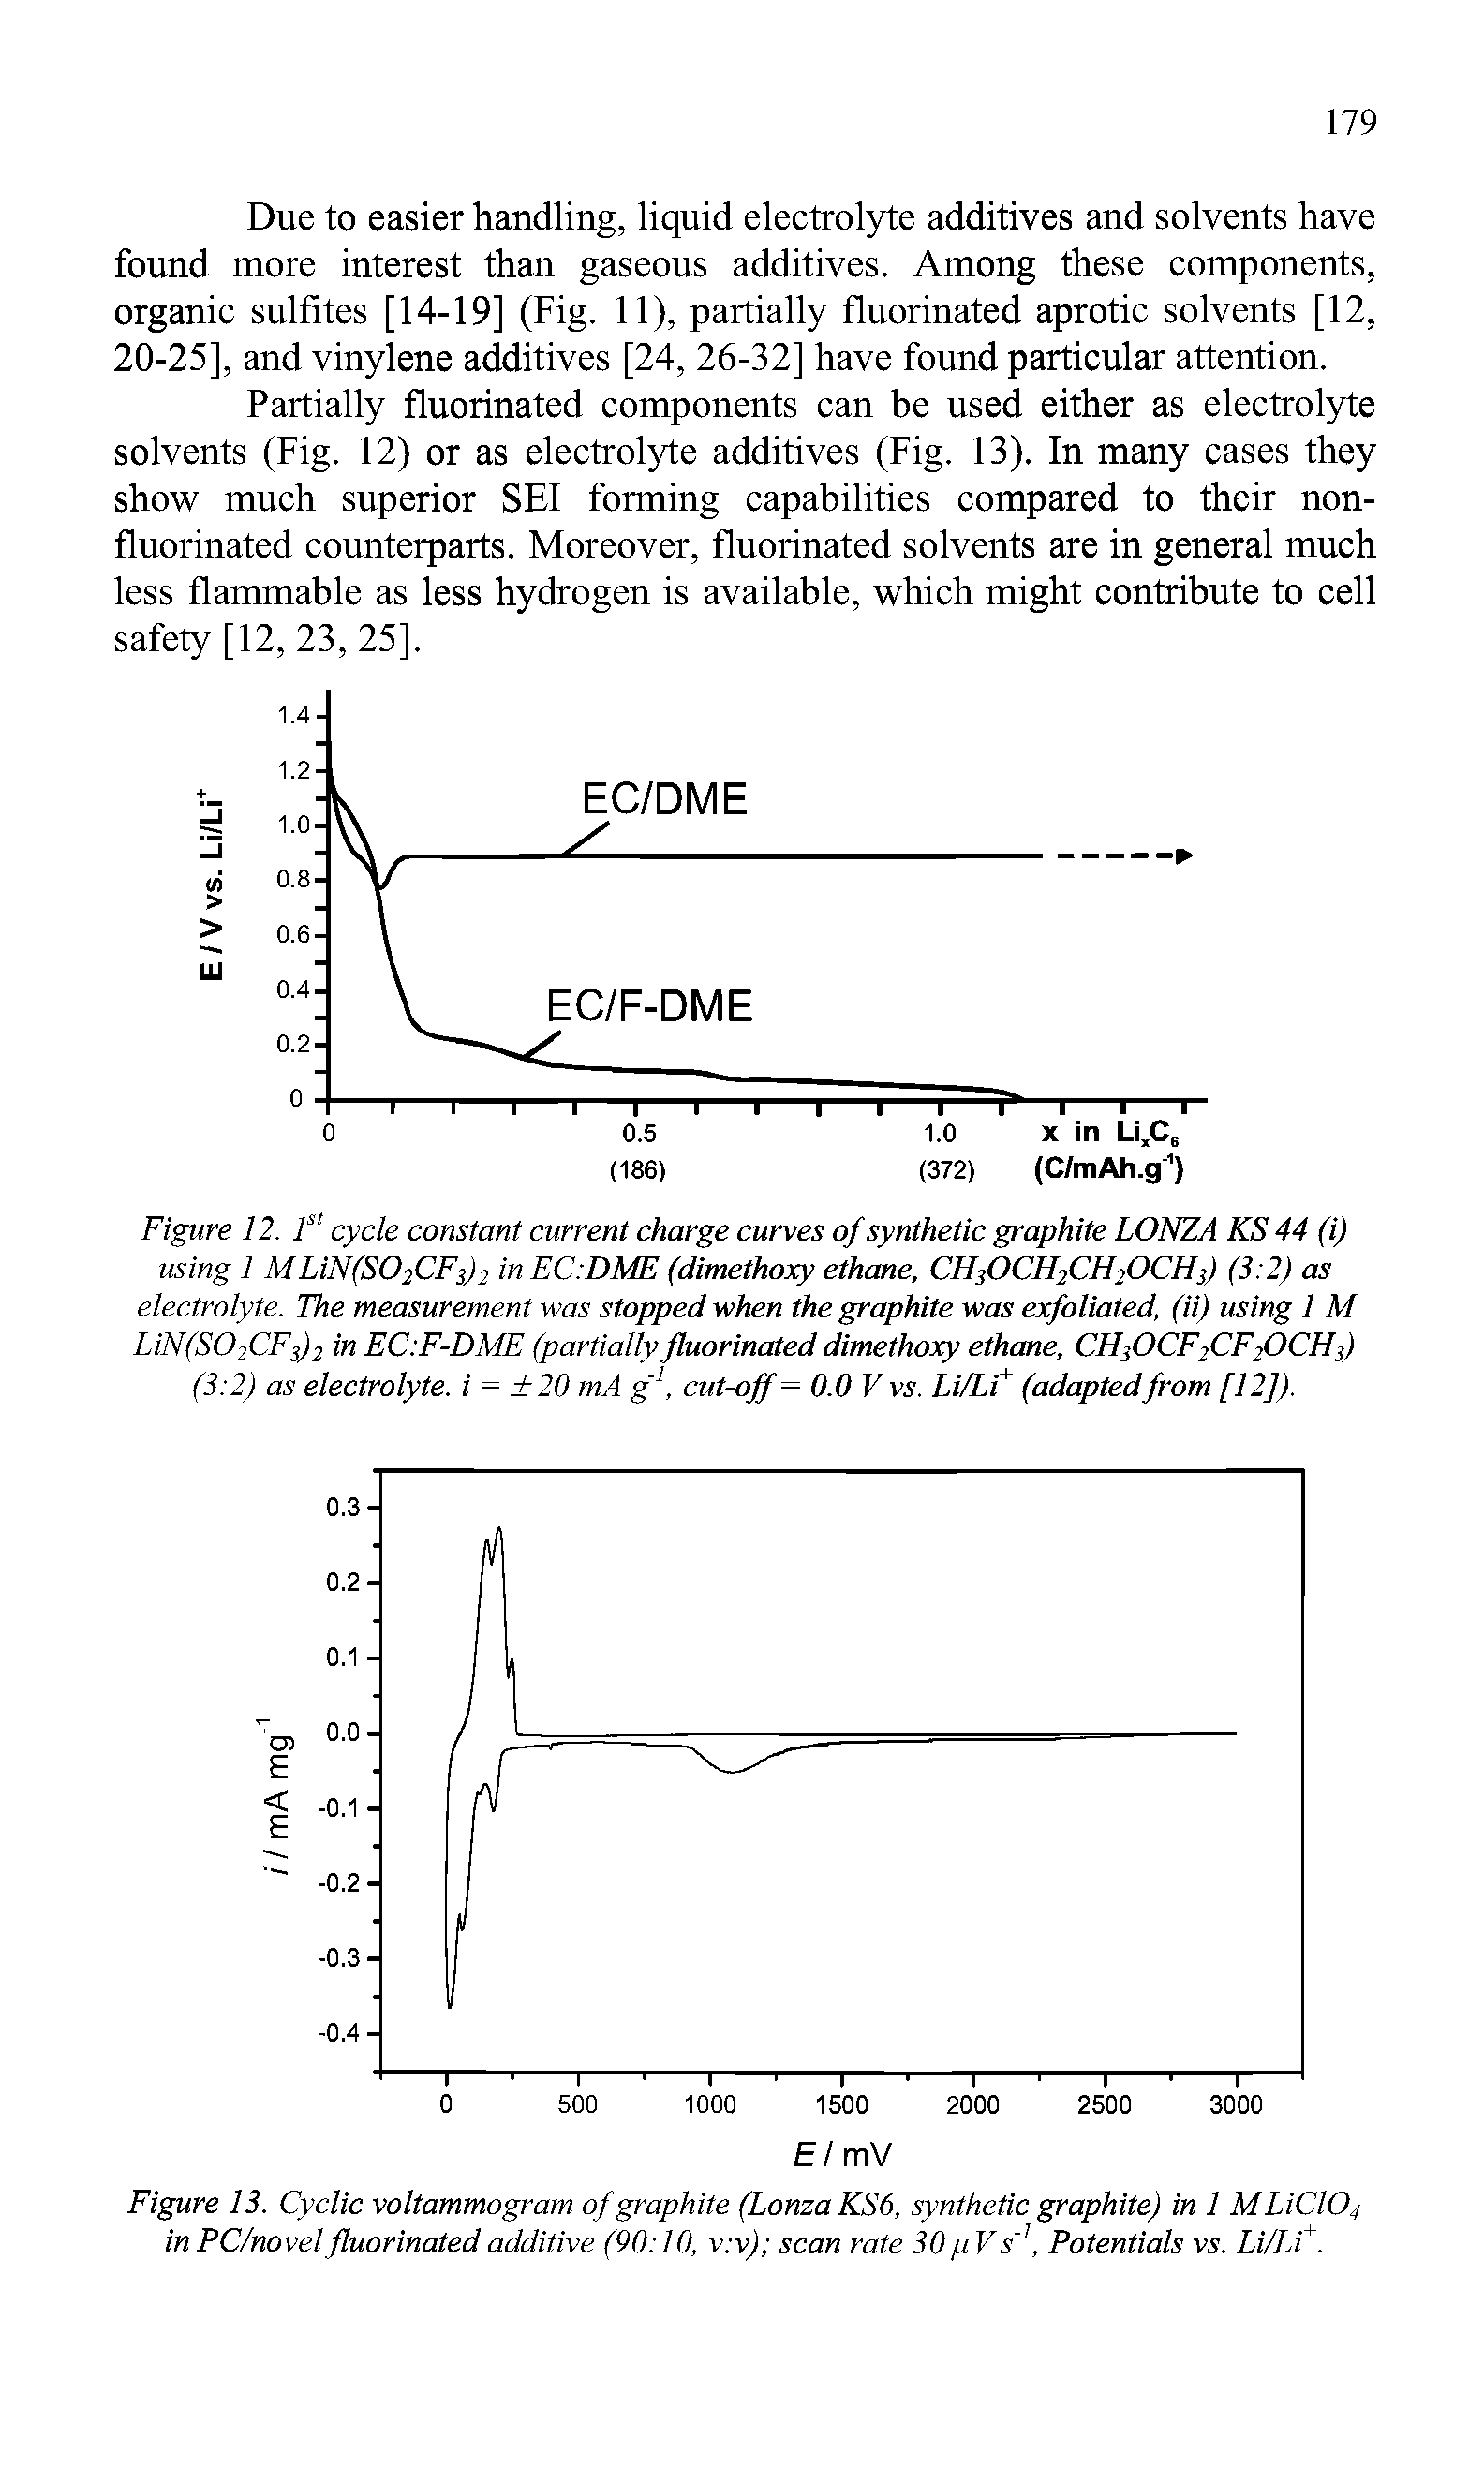 Figure 12. F cycle constant current charge curves of synthetic graphite LONZA KS 44 (i) using 1 MLiN(S02CF3)2 in EC.DME (dimethoxy ethane, CH3OCH2CH2OCH3) (3 2) as electrolyte. The measurement was stopped when the graphite was exfoliated, (ii) using 1 M LiN(S02CF3)2 in EC F-DME (partially fluorinated dimethoxy ethane, CH3OCF2CF2OCH3) (3 2) as electrolyte, i = 20 mA g1, cut-off = 0.0 V vs. Li/Li+ (adaptedfrom [12]).